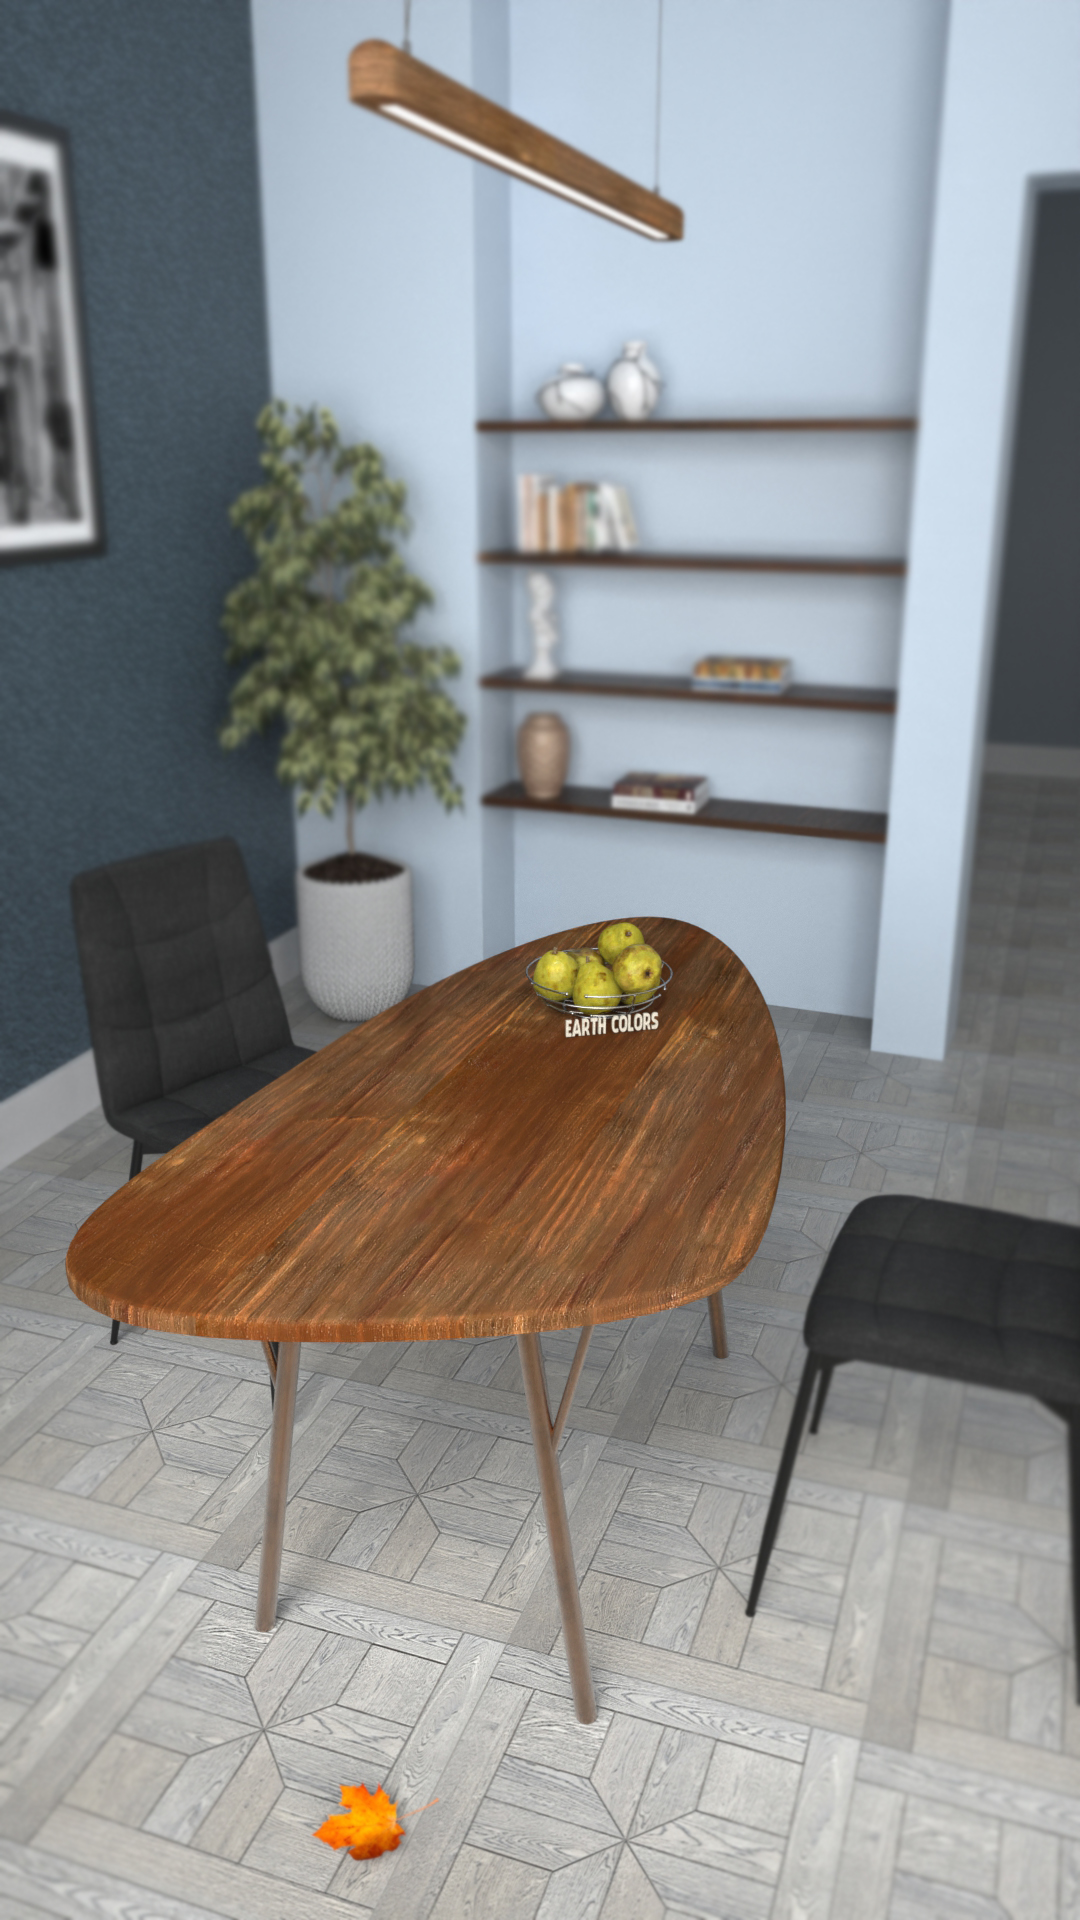 4 seat round dining table